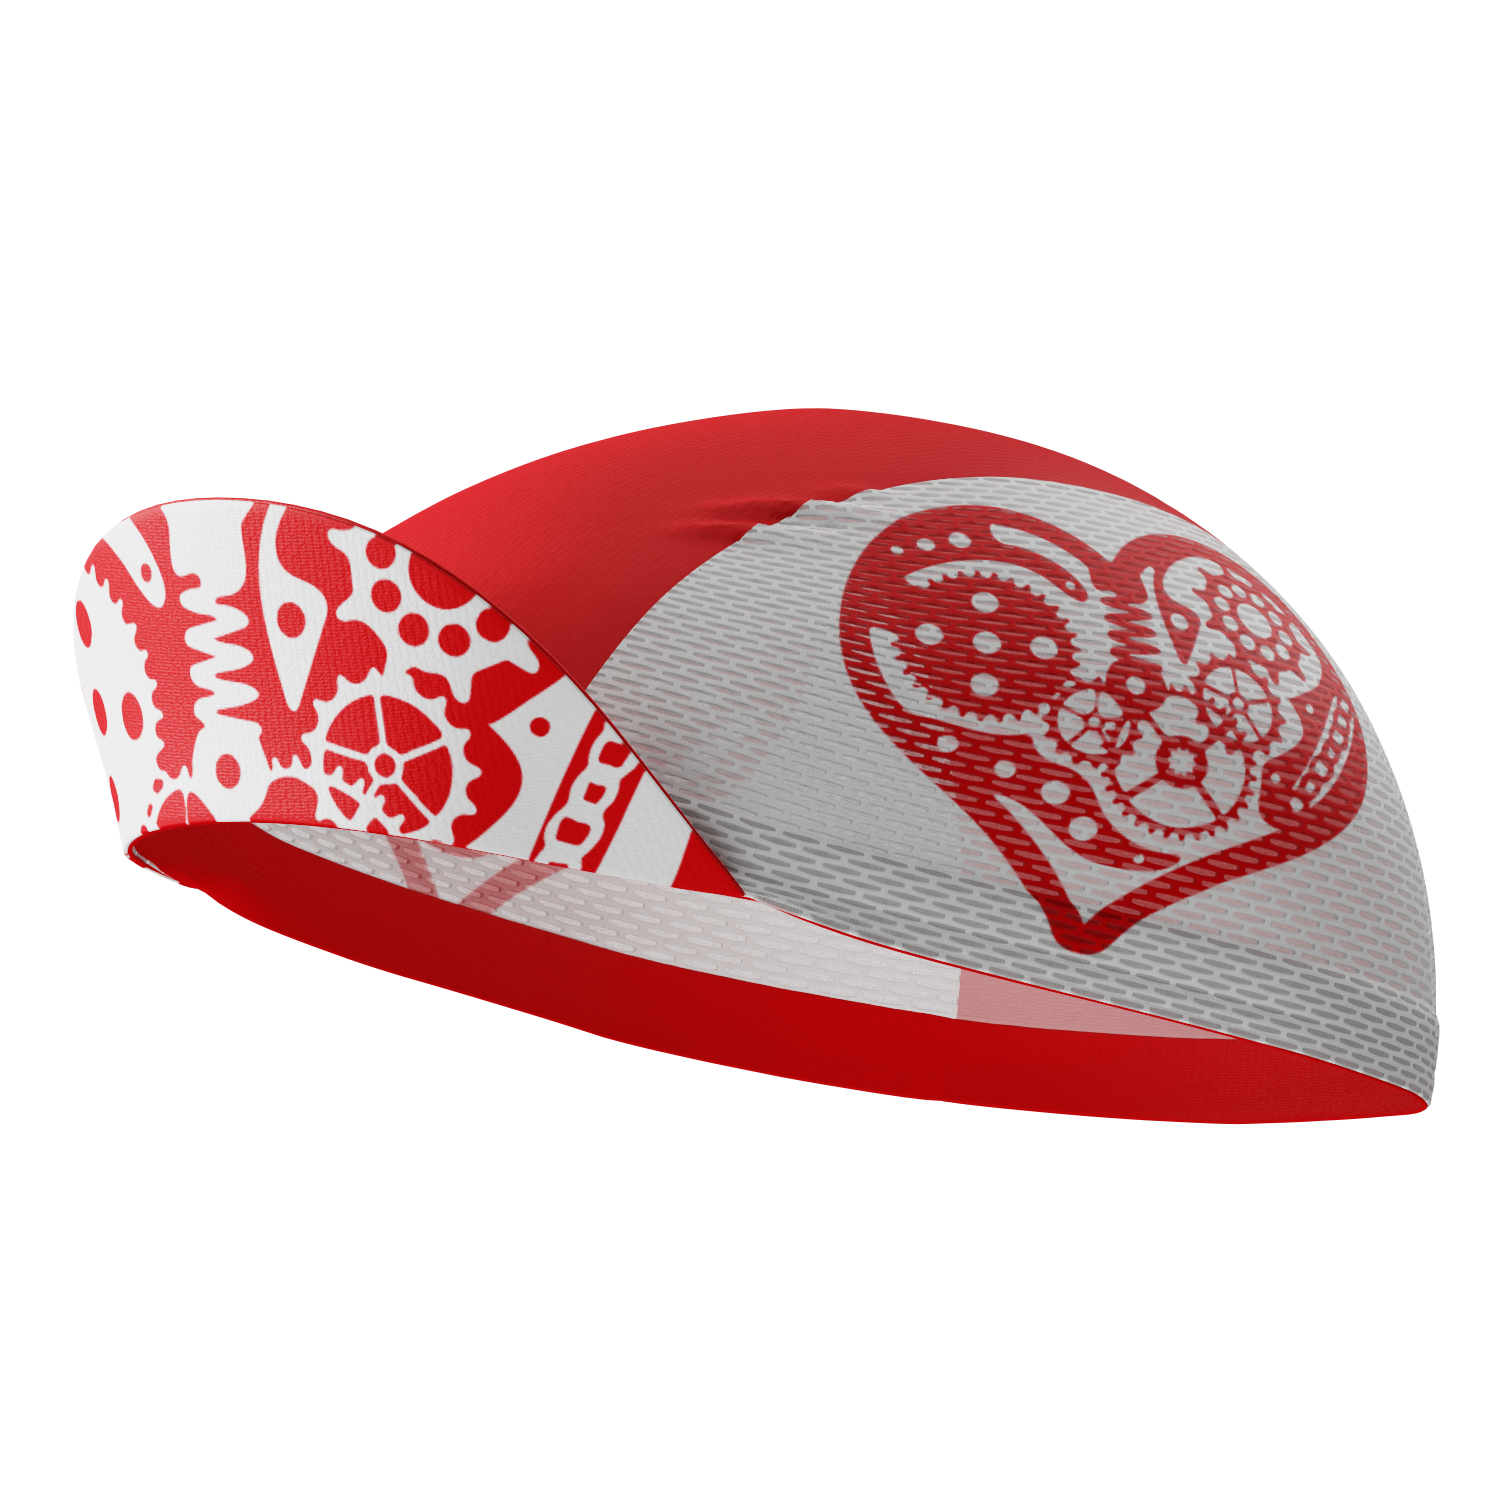 Unisex Love Cycling Quick-Dry Cycling Cap